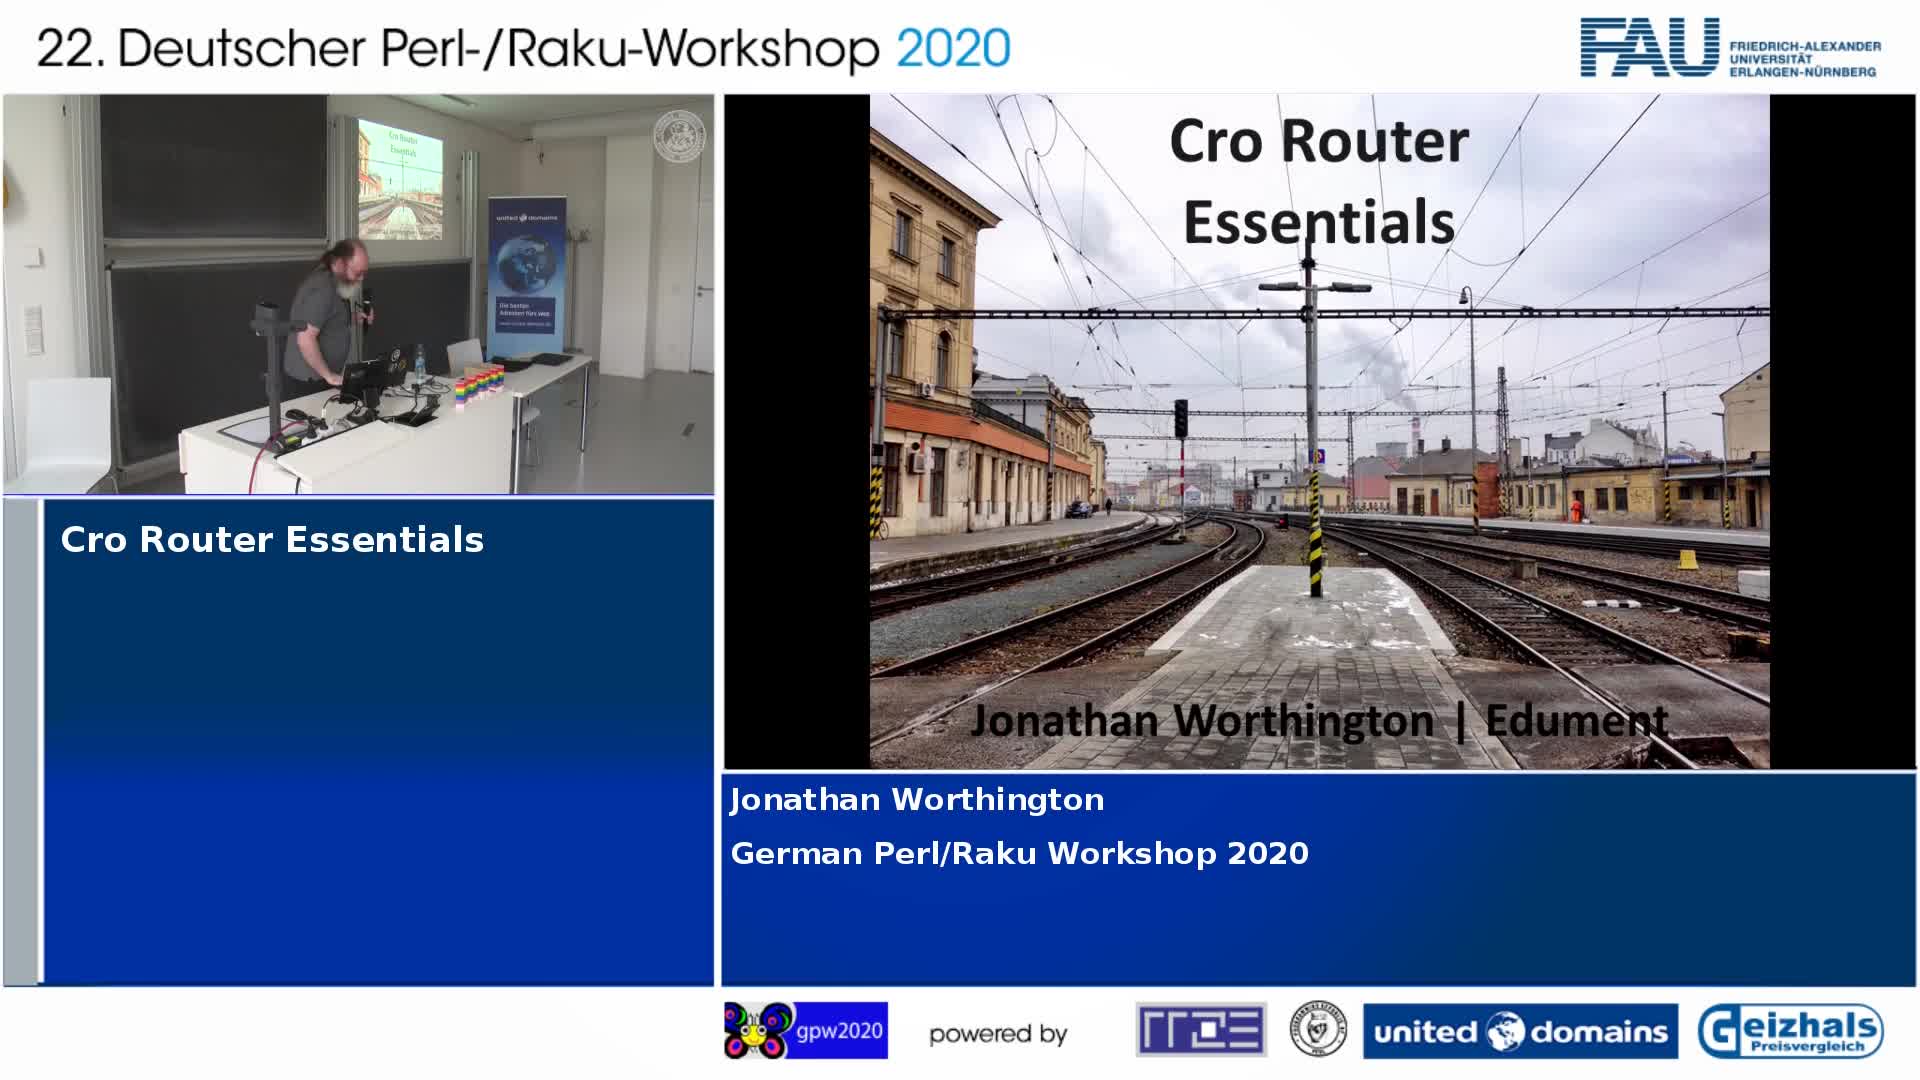 Cro Router Essentials preview image